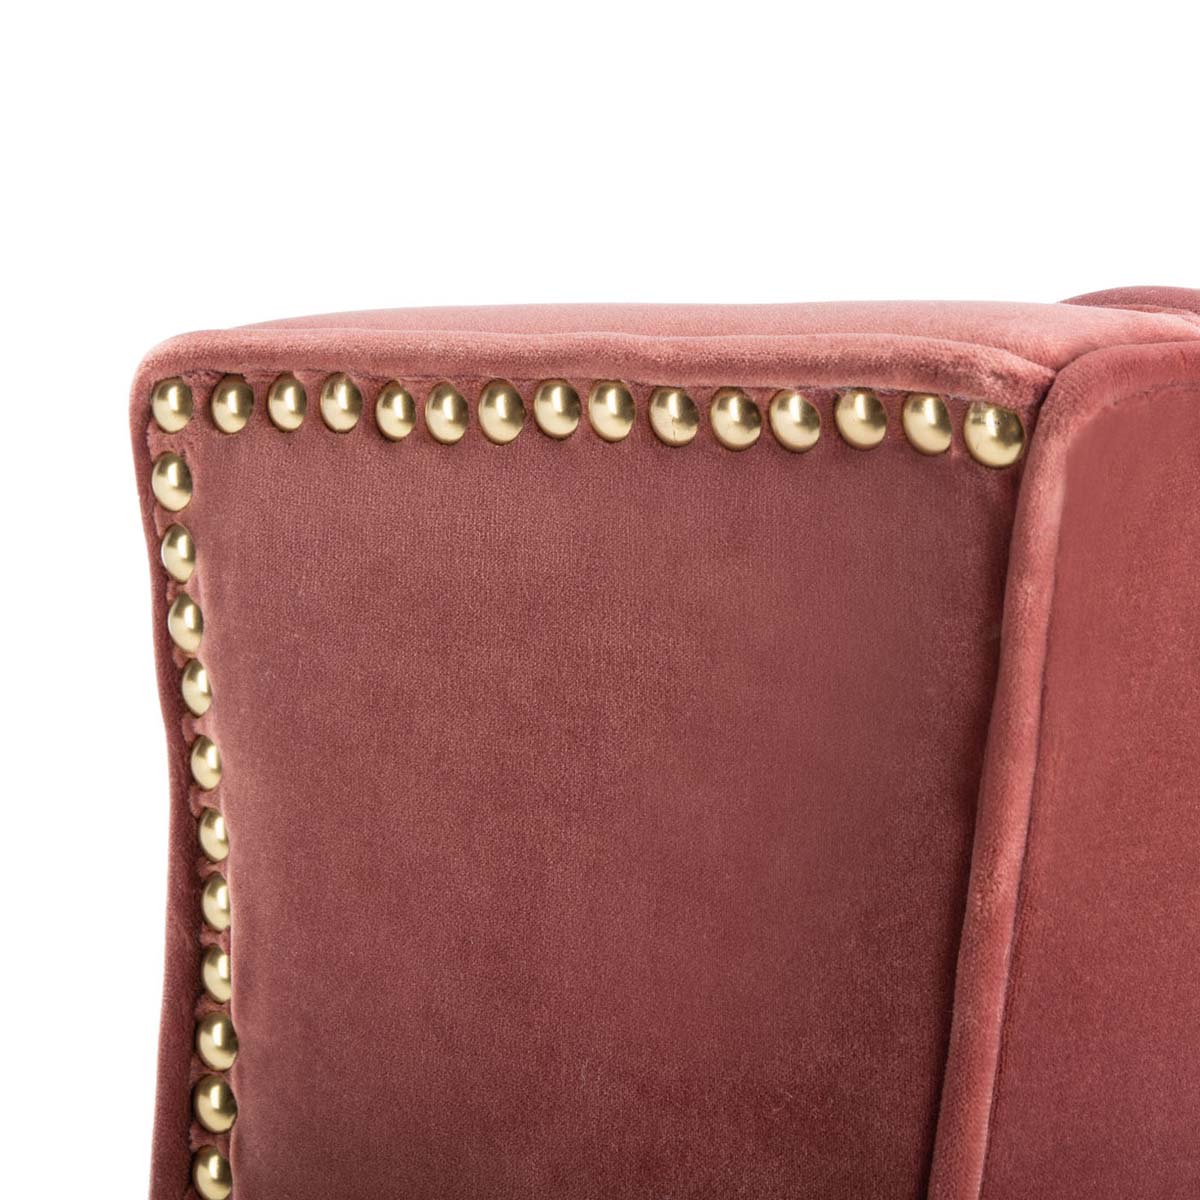 Safavieh Couture Vitali Studded Chaise